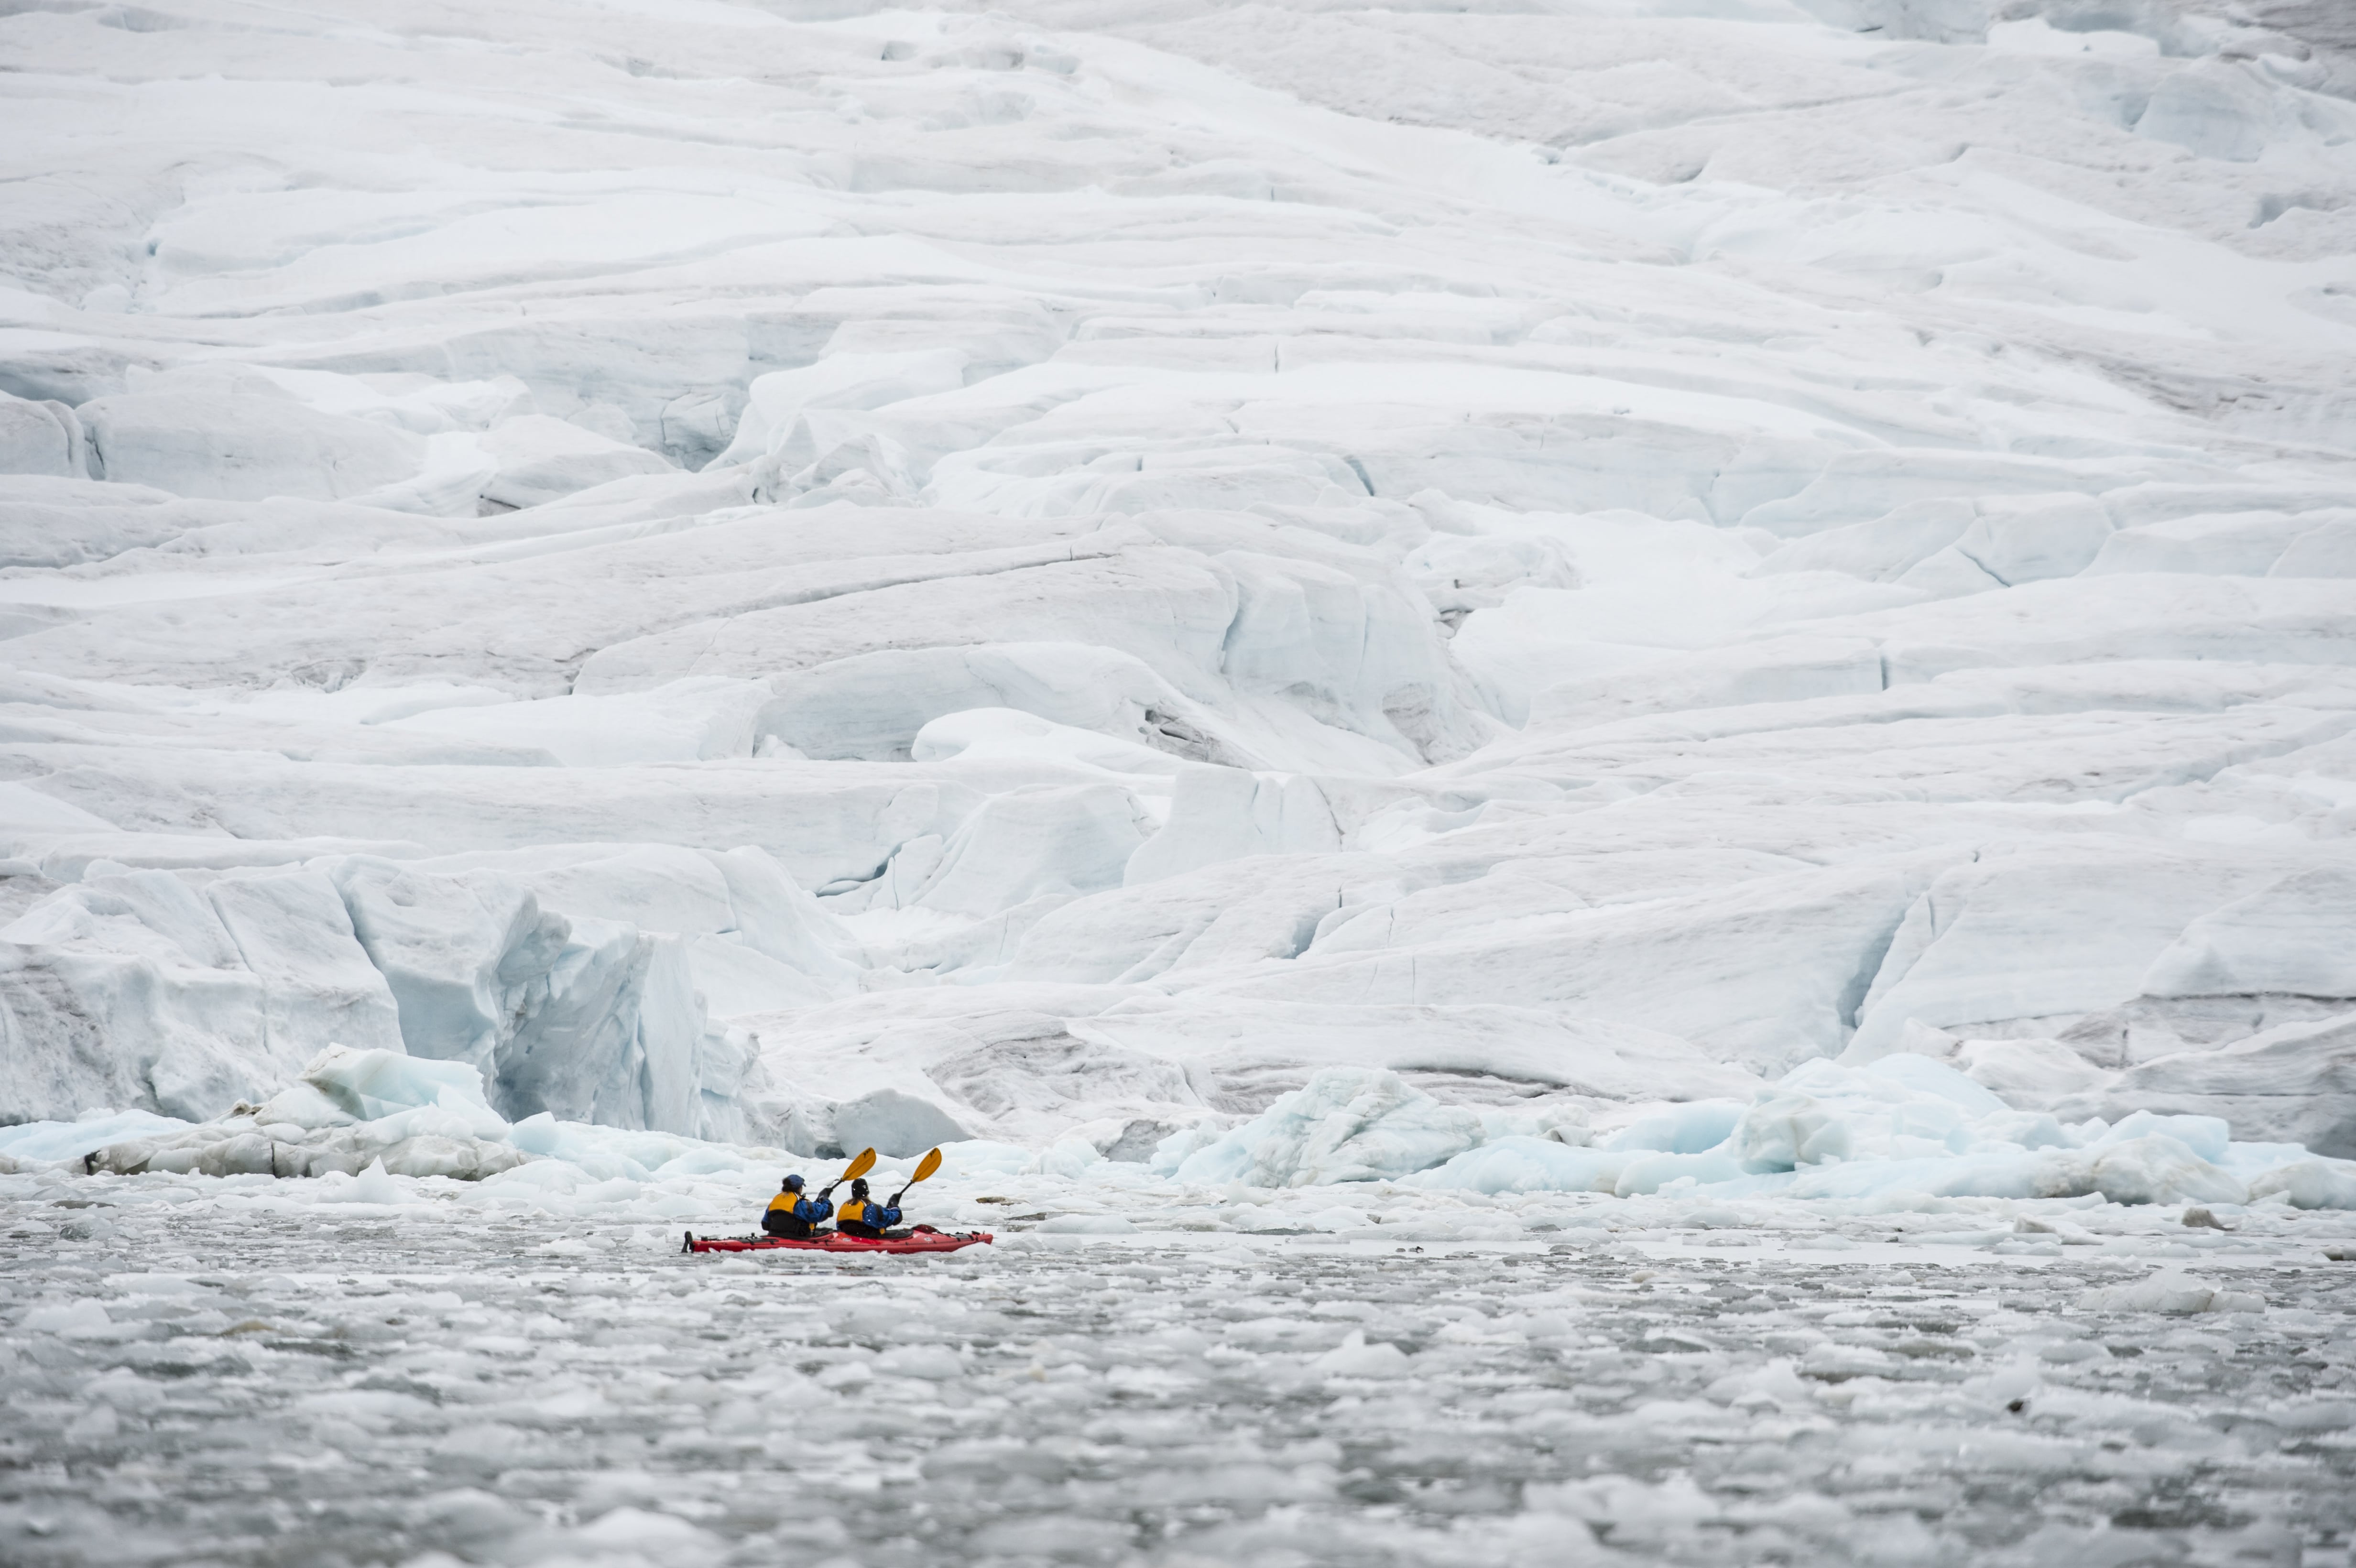 Kayaking in the ice in polar environment